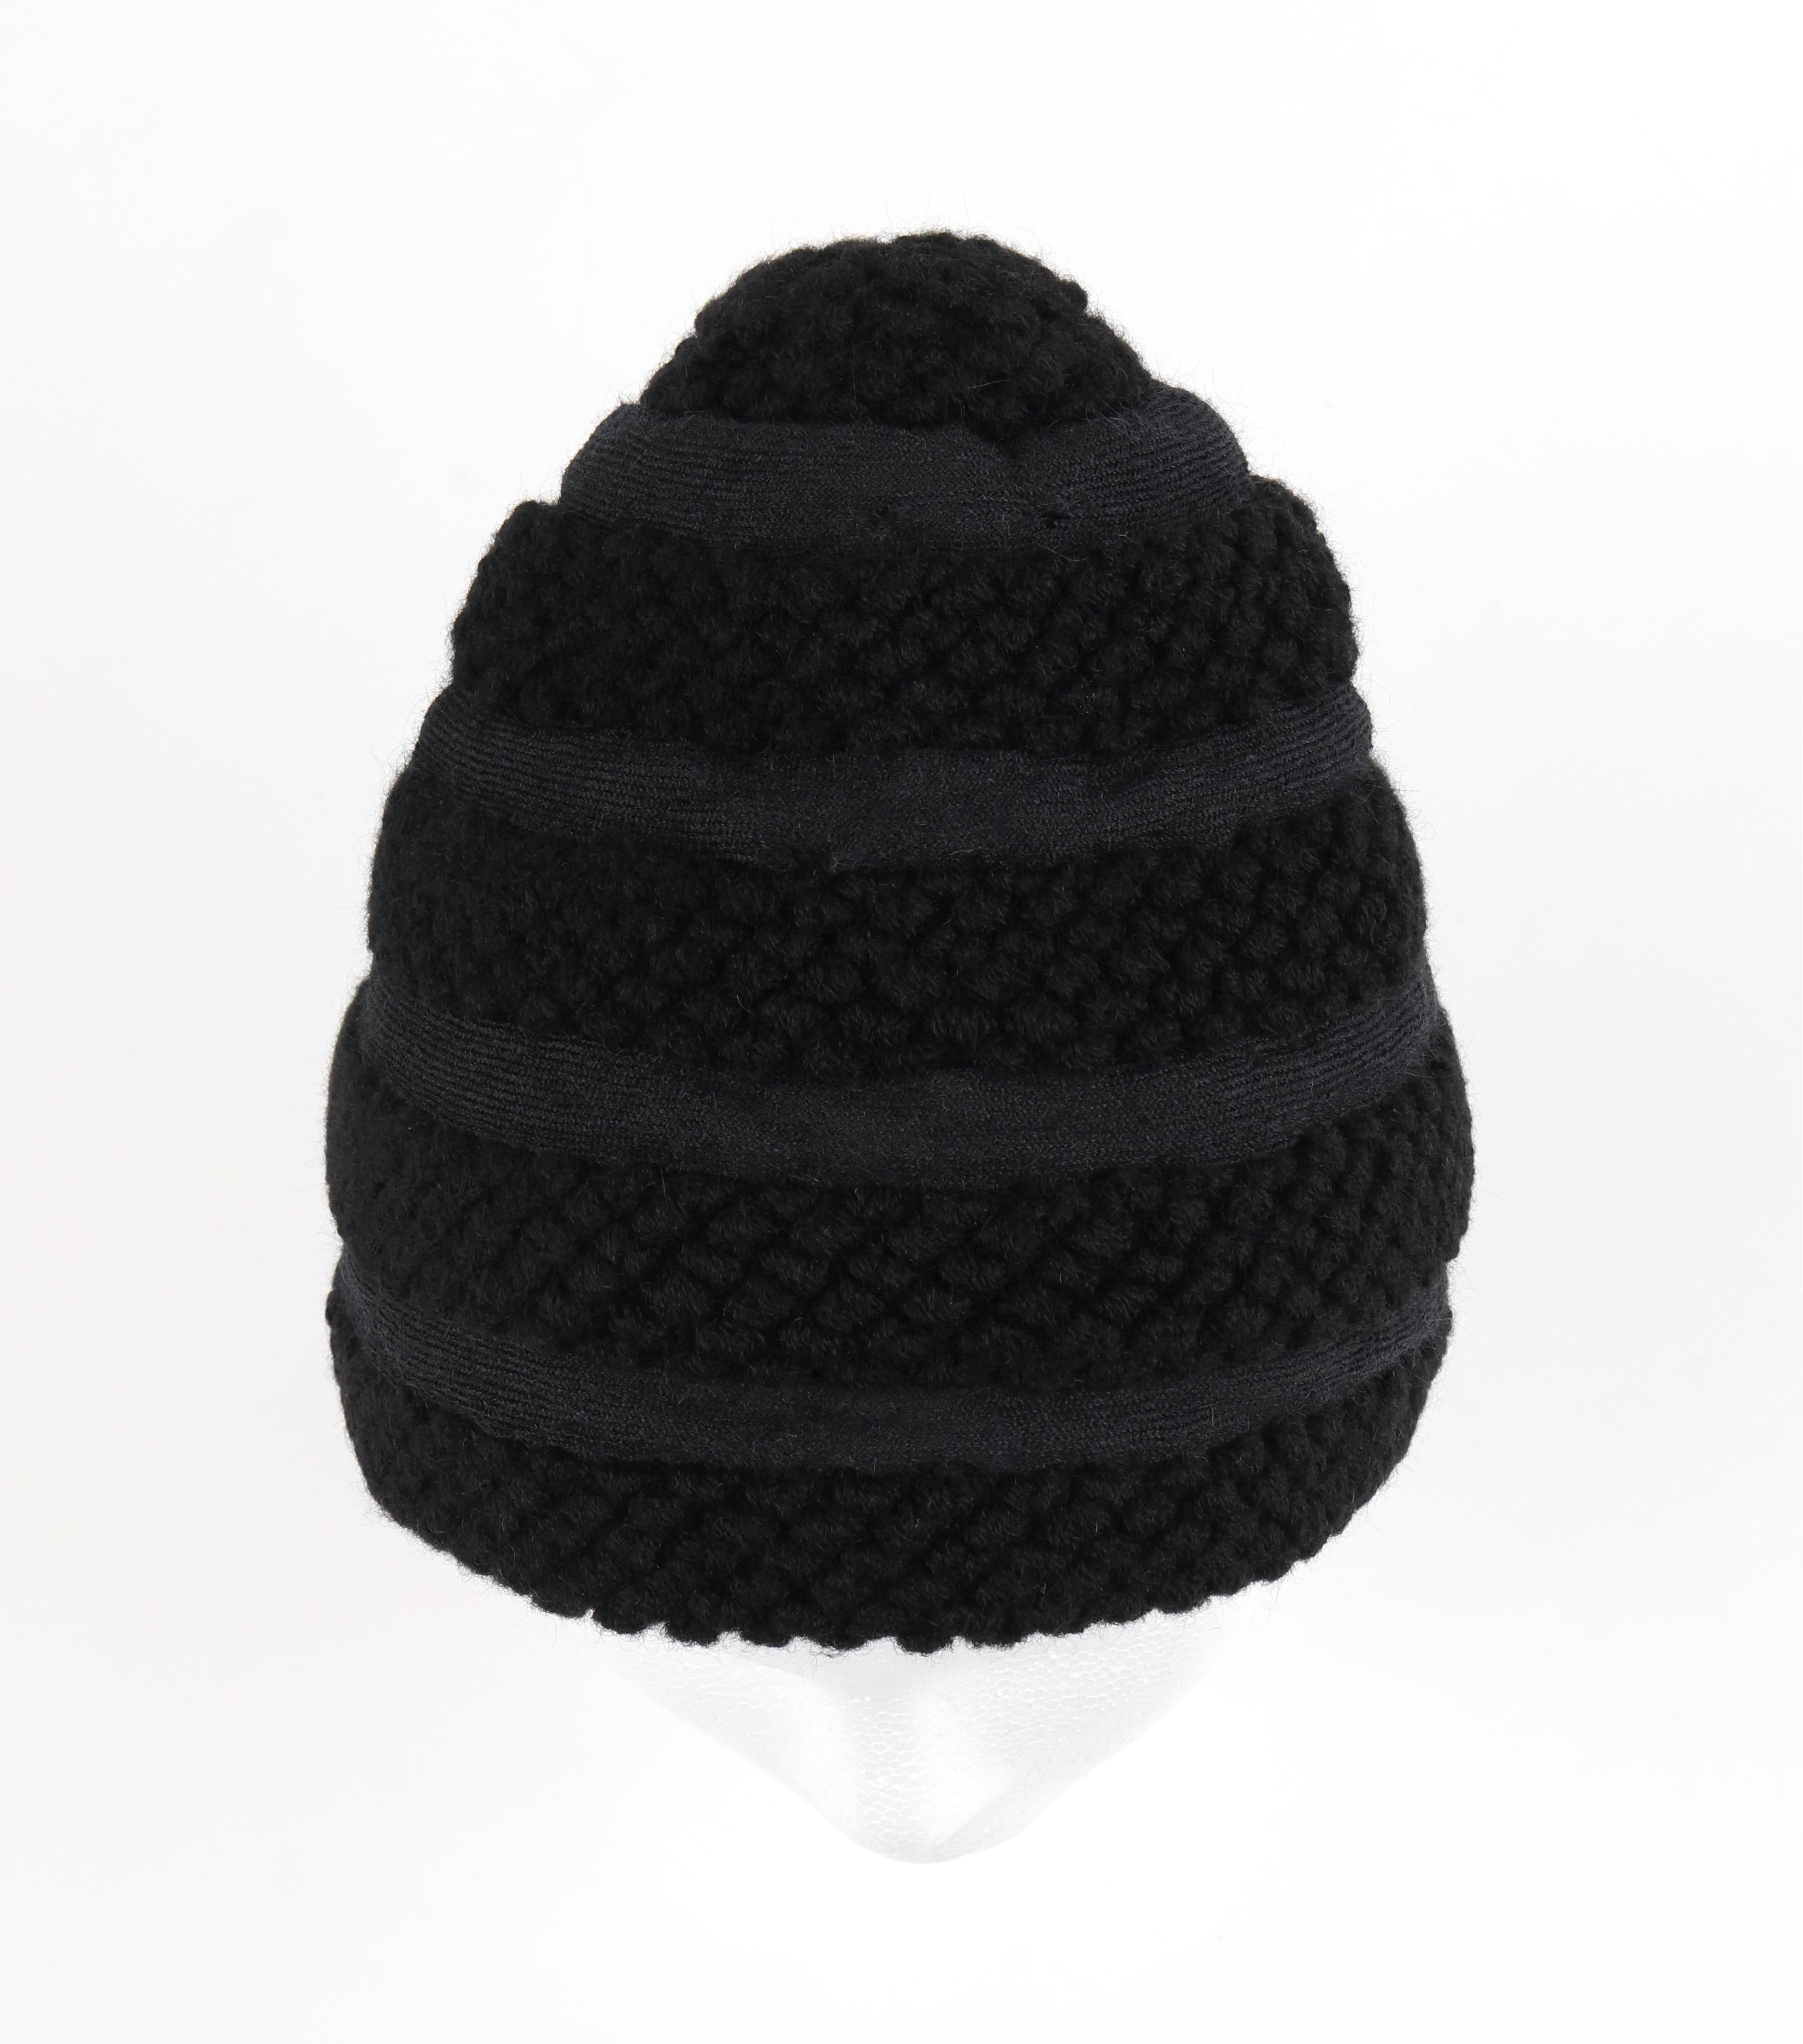 Women's CHRISTIAN DIOR Early c.1960’s Couture Black Crochet Knit Layered Cap Hat 